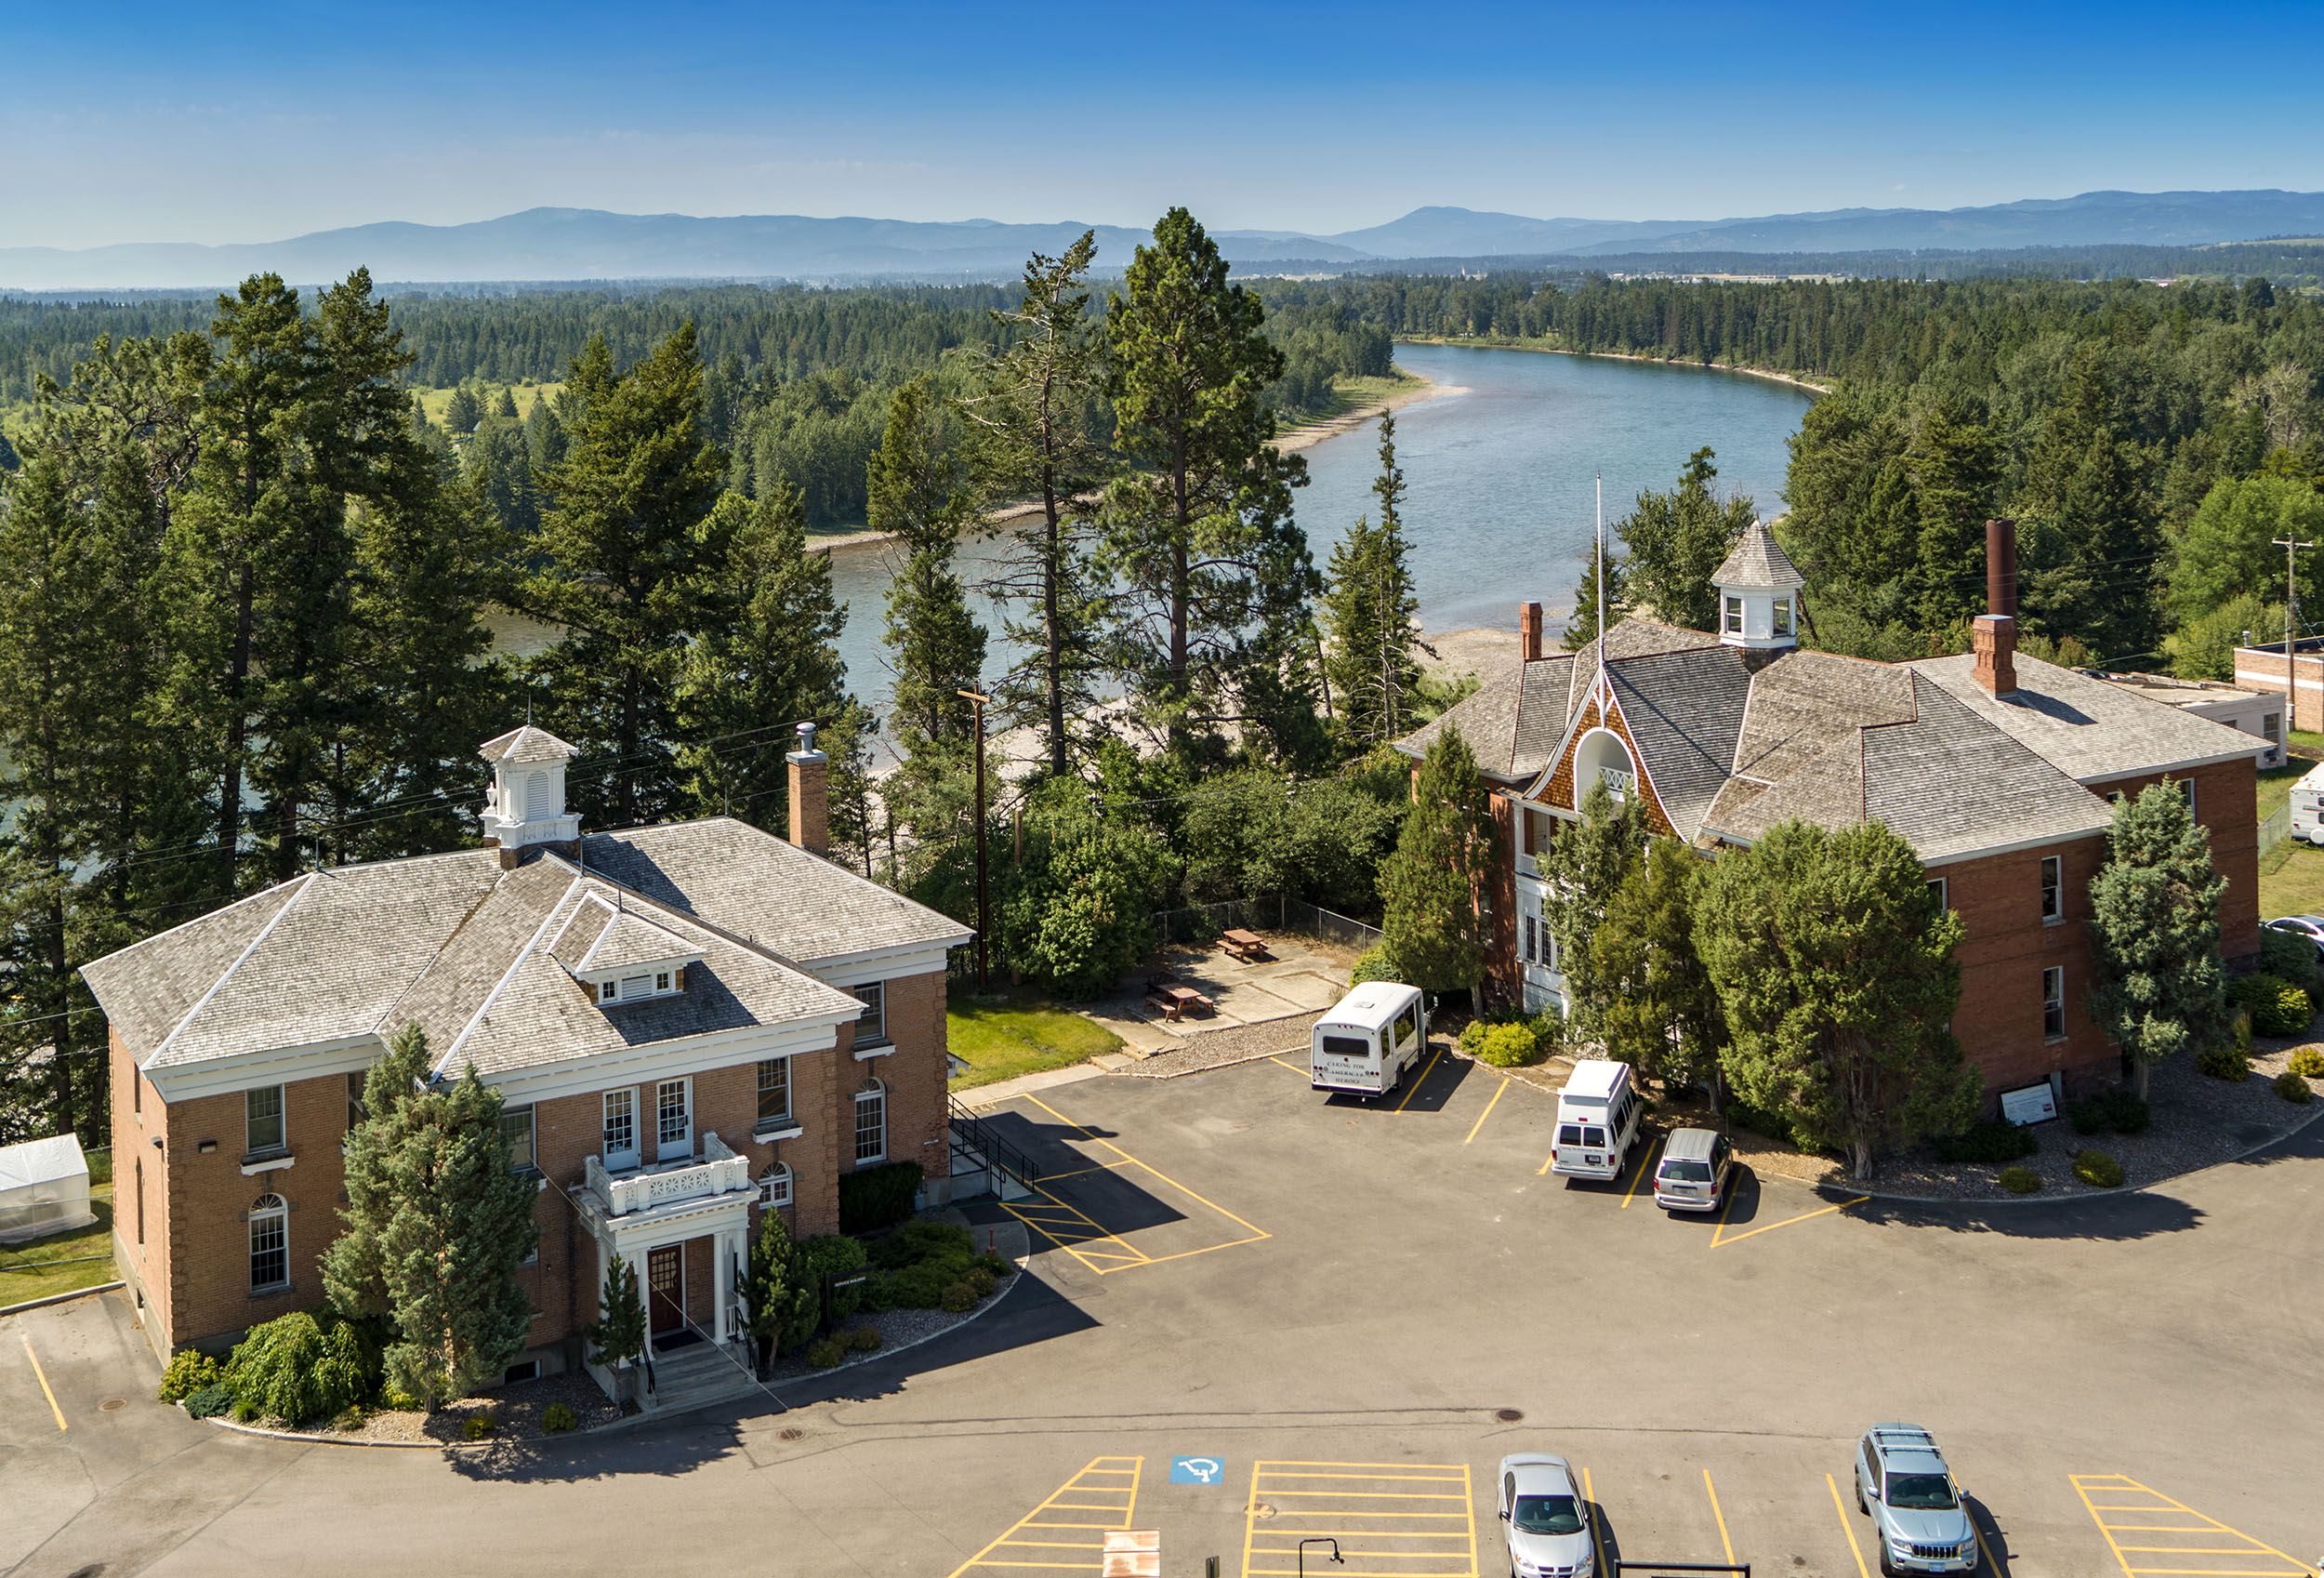 An aerial view of two main buildings on the Veterans home campus. The flathead river is in the background.